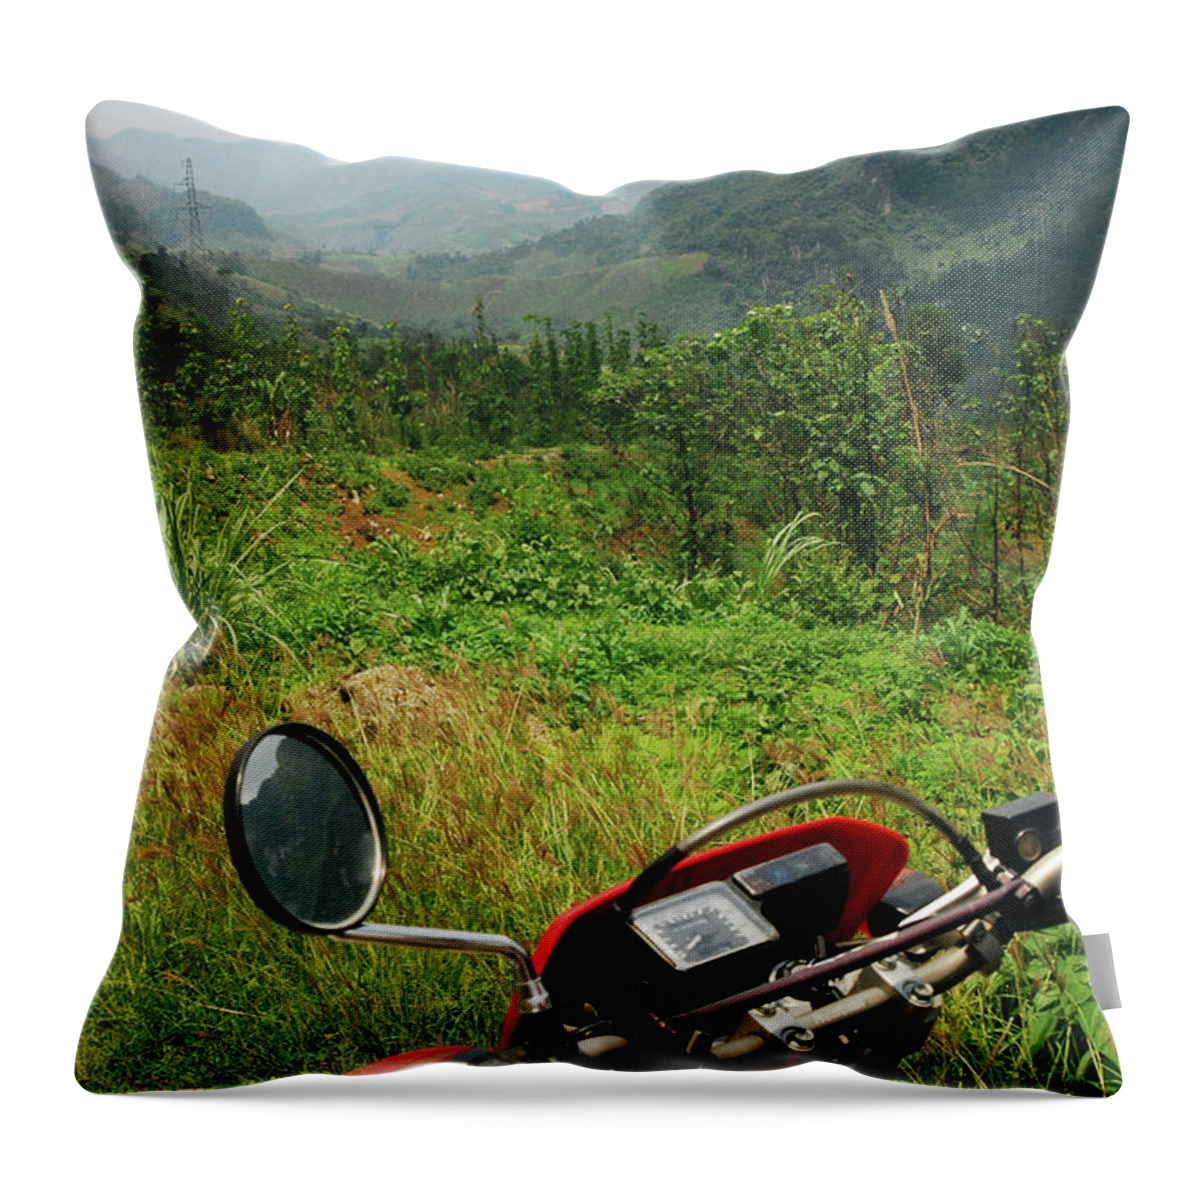 Southeast Asia Throw Pillow featuring the photograph Adventure Motorbike Trip Through by Thepurpledoor